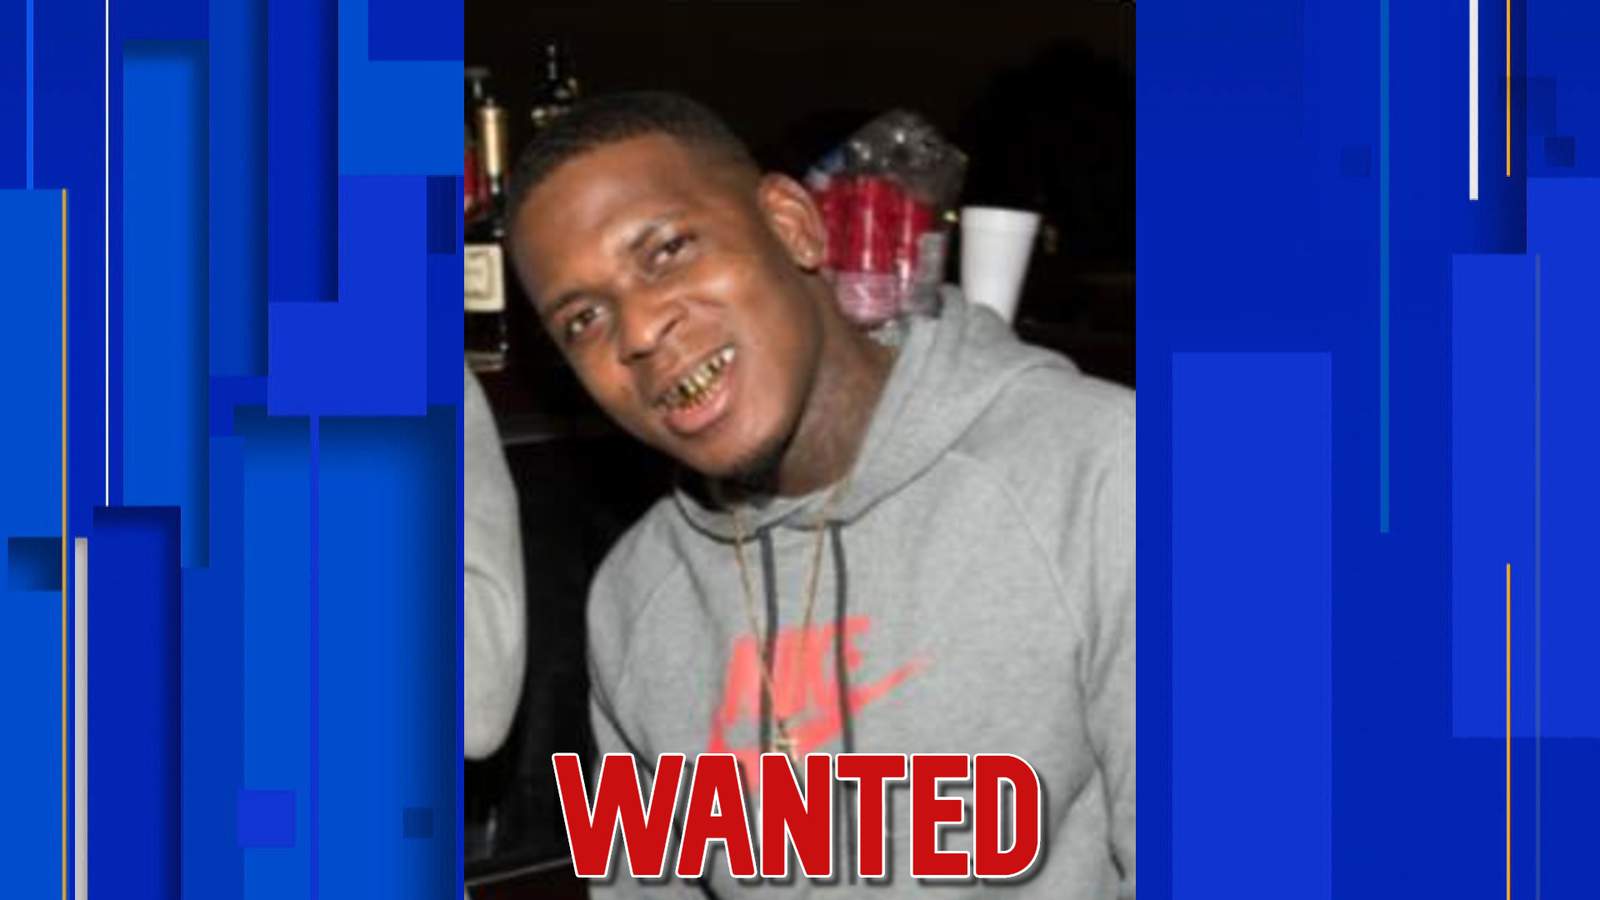 Warrant issued for man connected to fatal shooting at a large block party